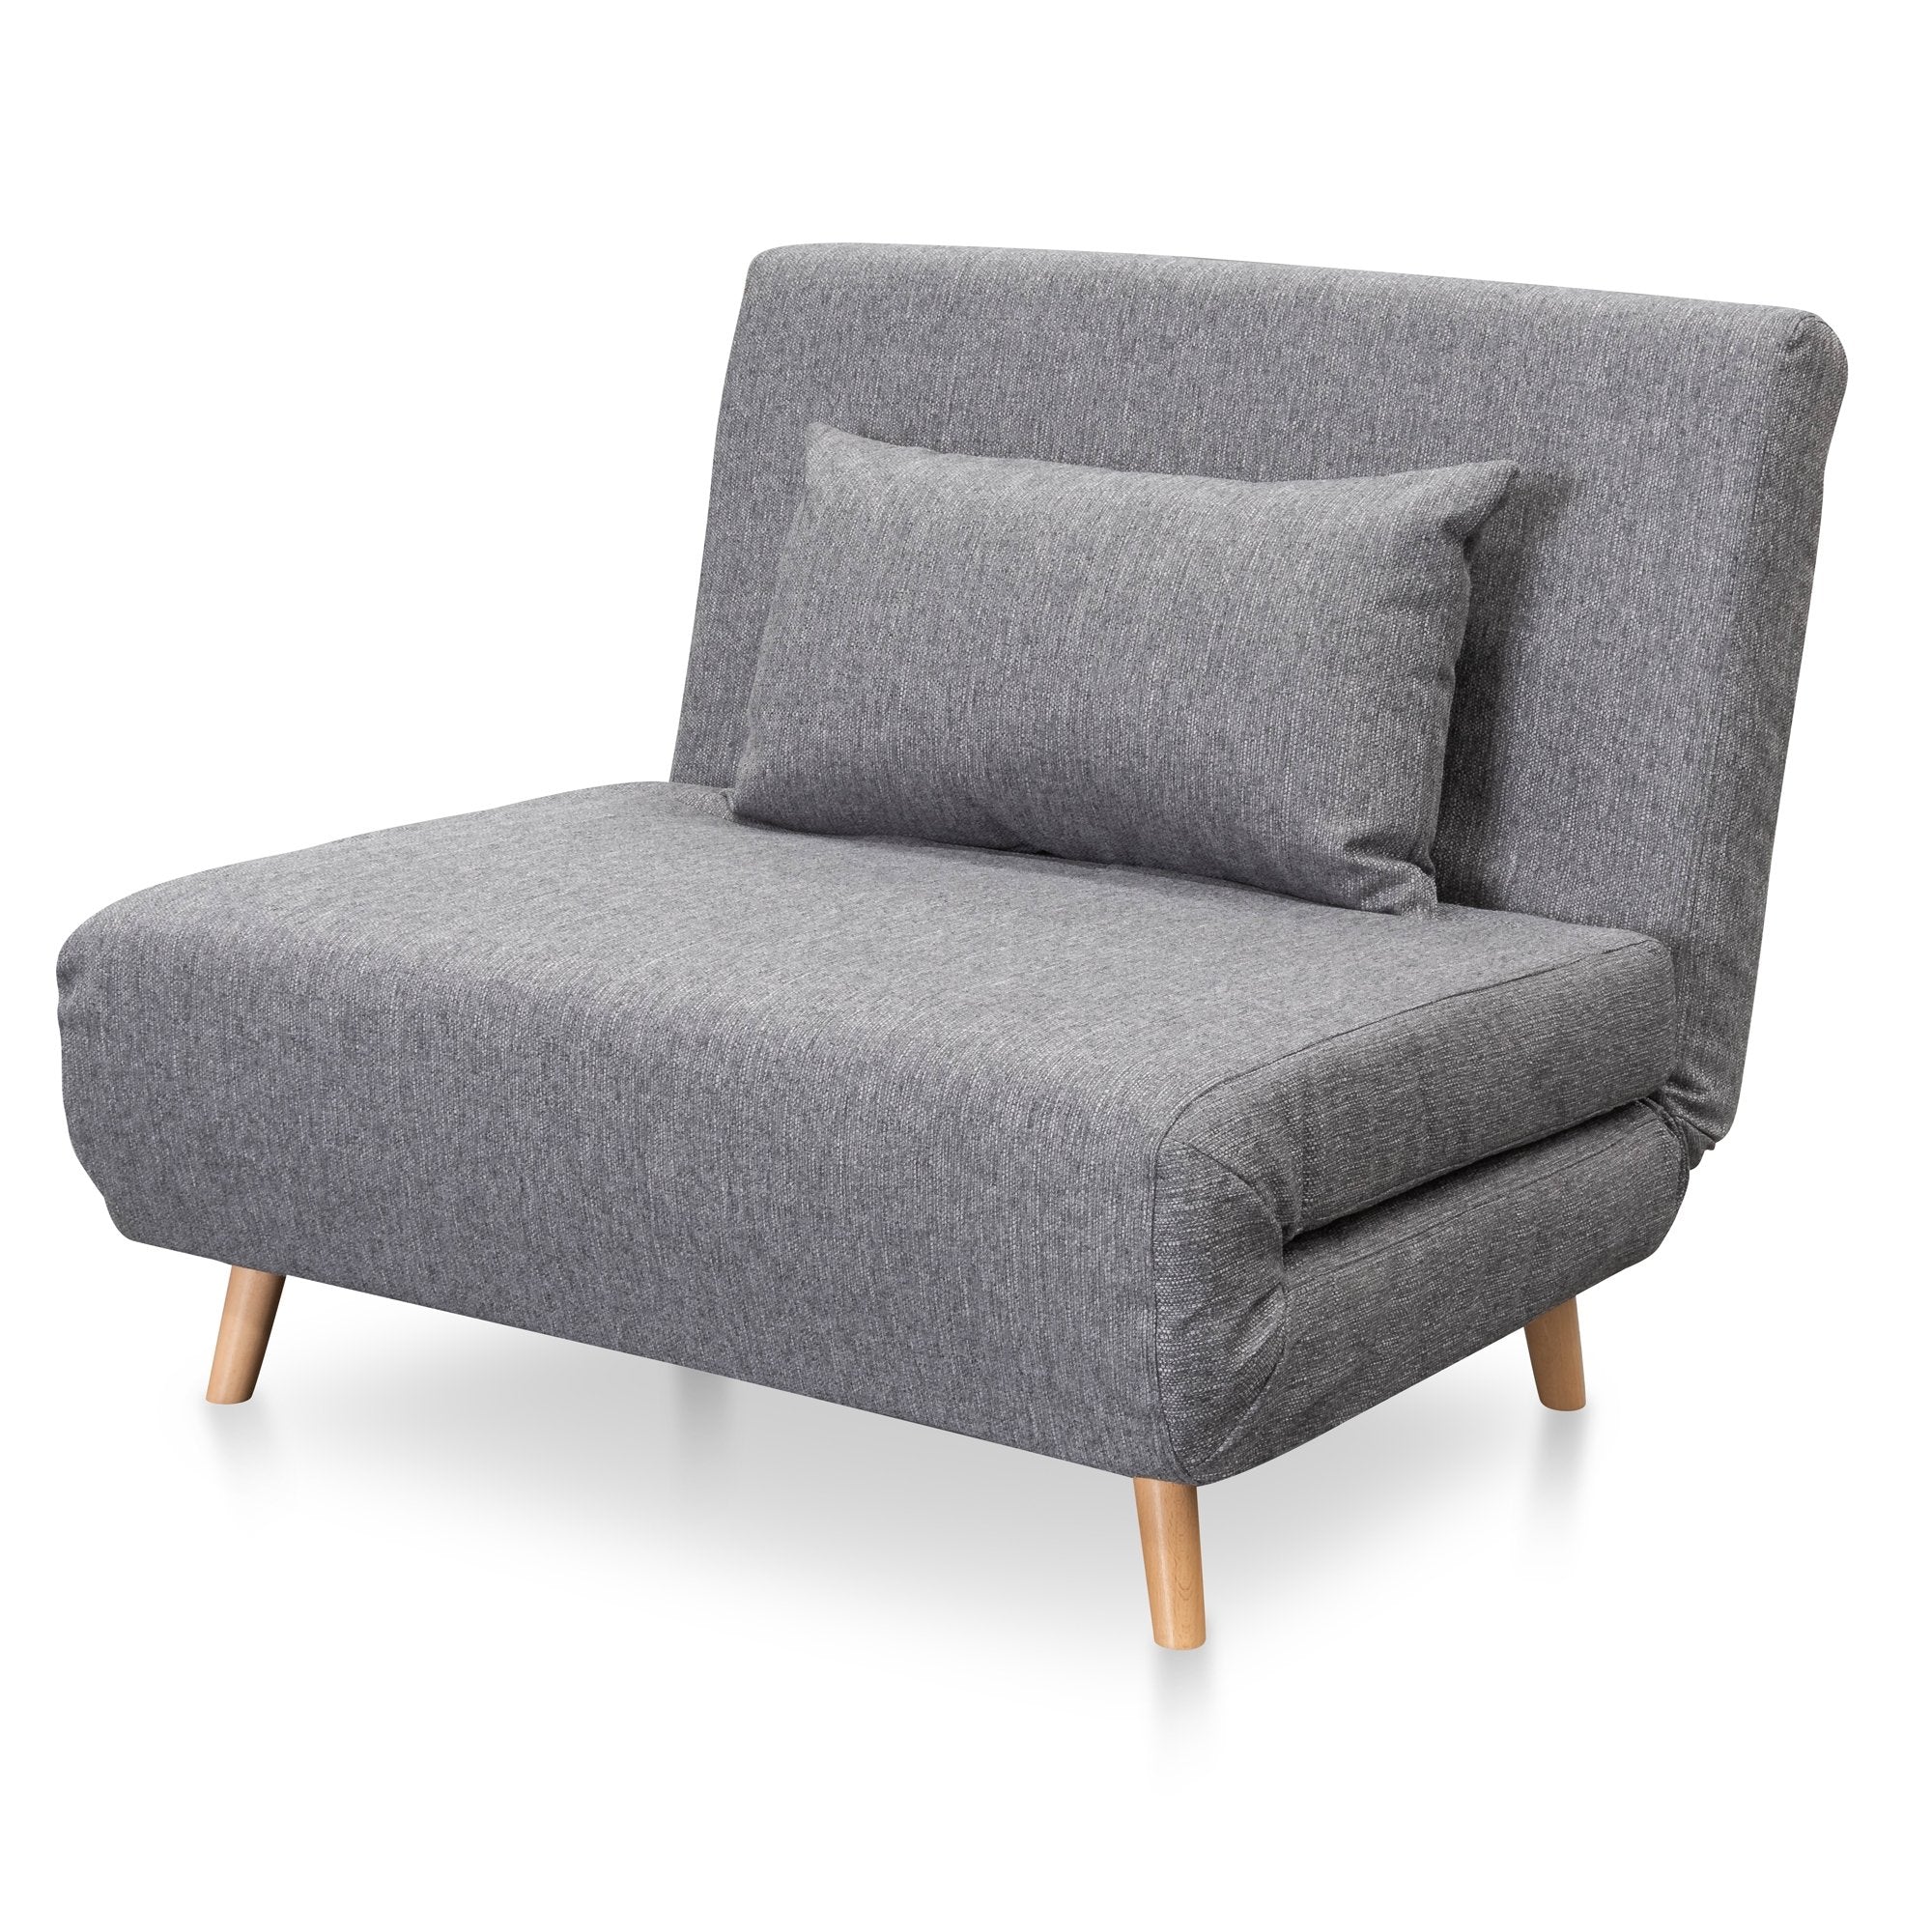 Charlotte Single Seater Sofa Bed - Cloudy Grey